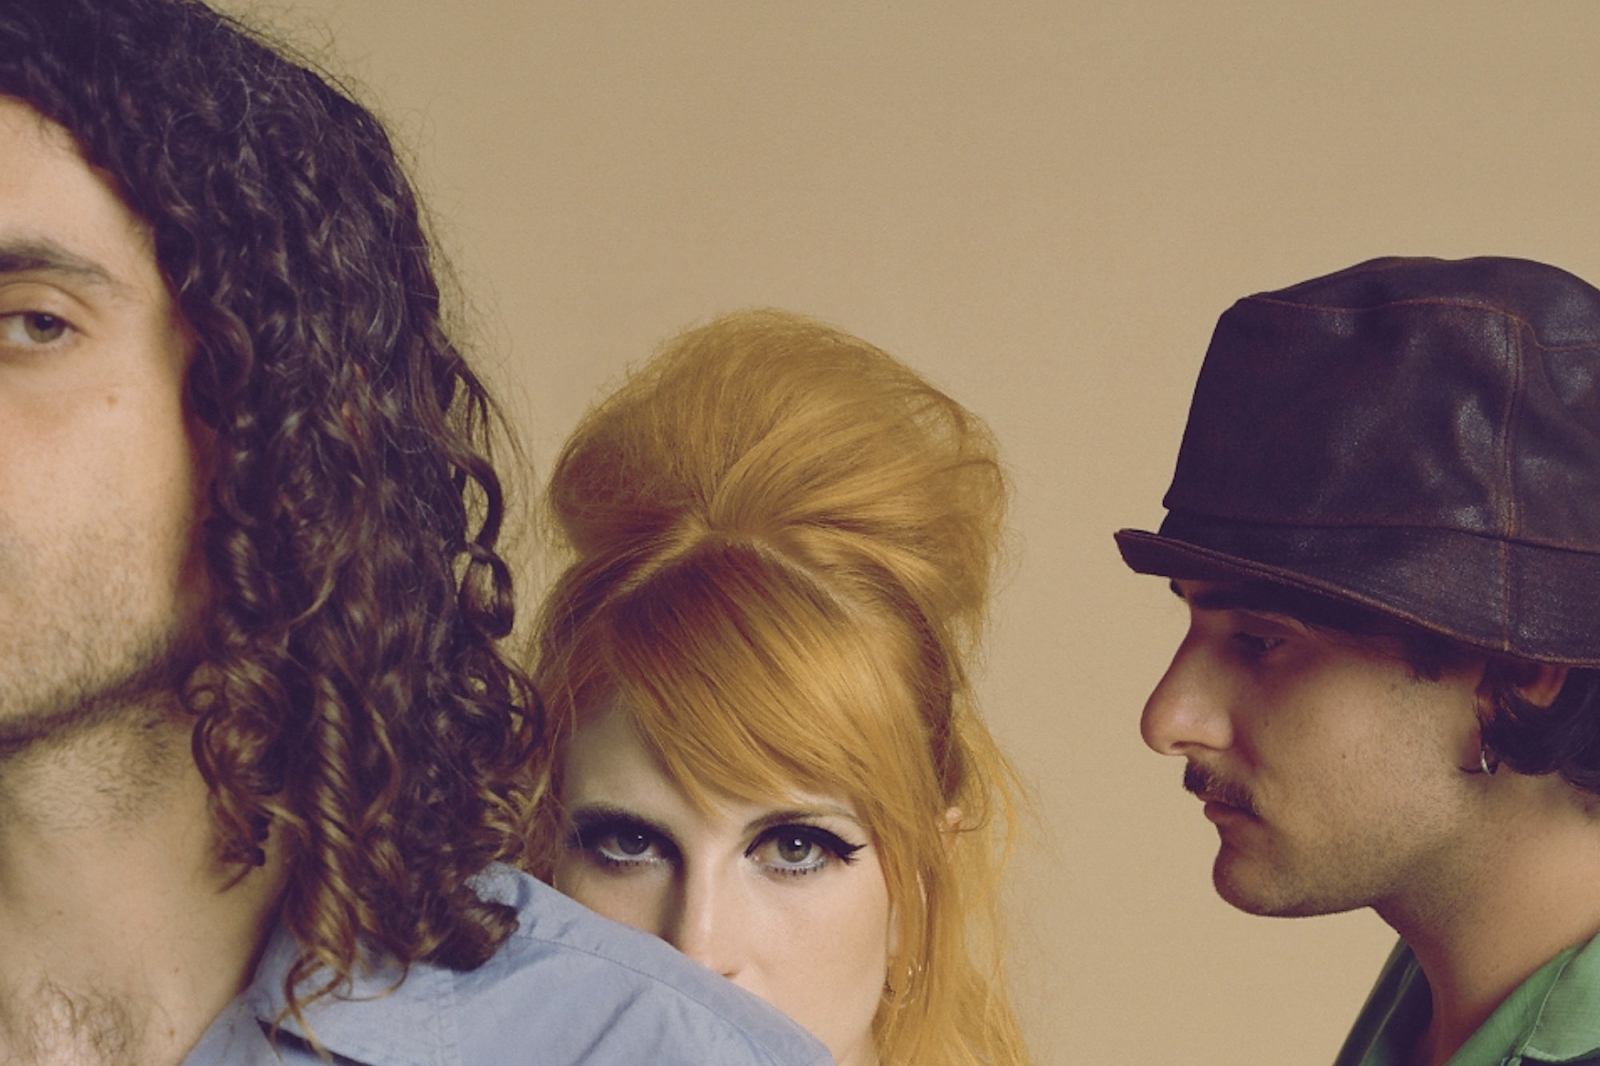 Tracks: Paramore, Poppy, Christine & the Queens and more